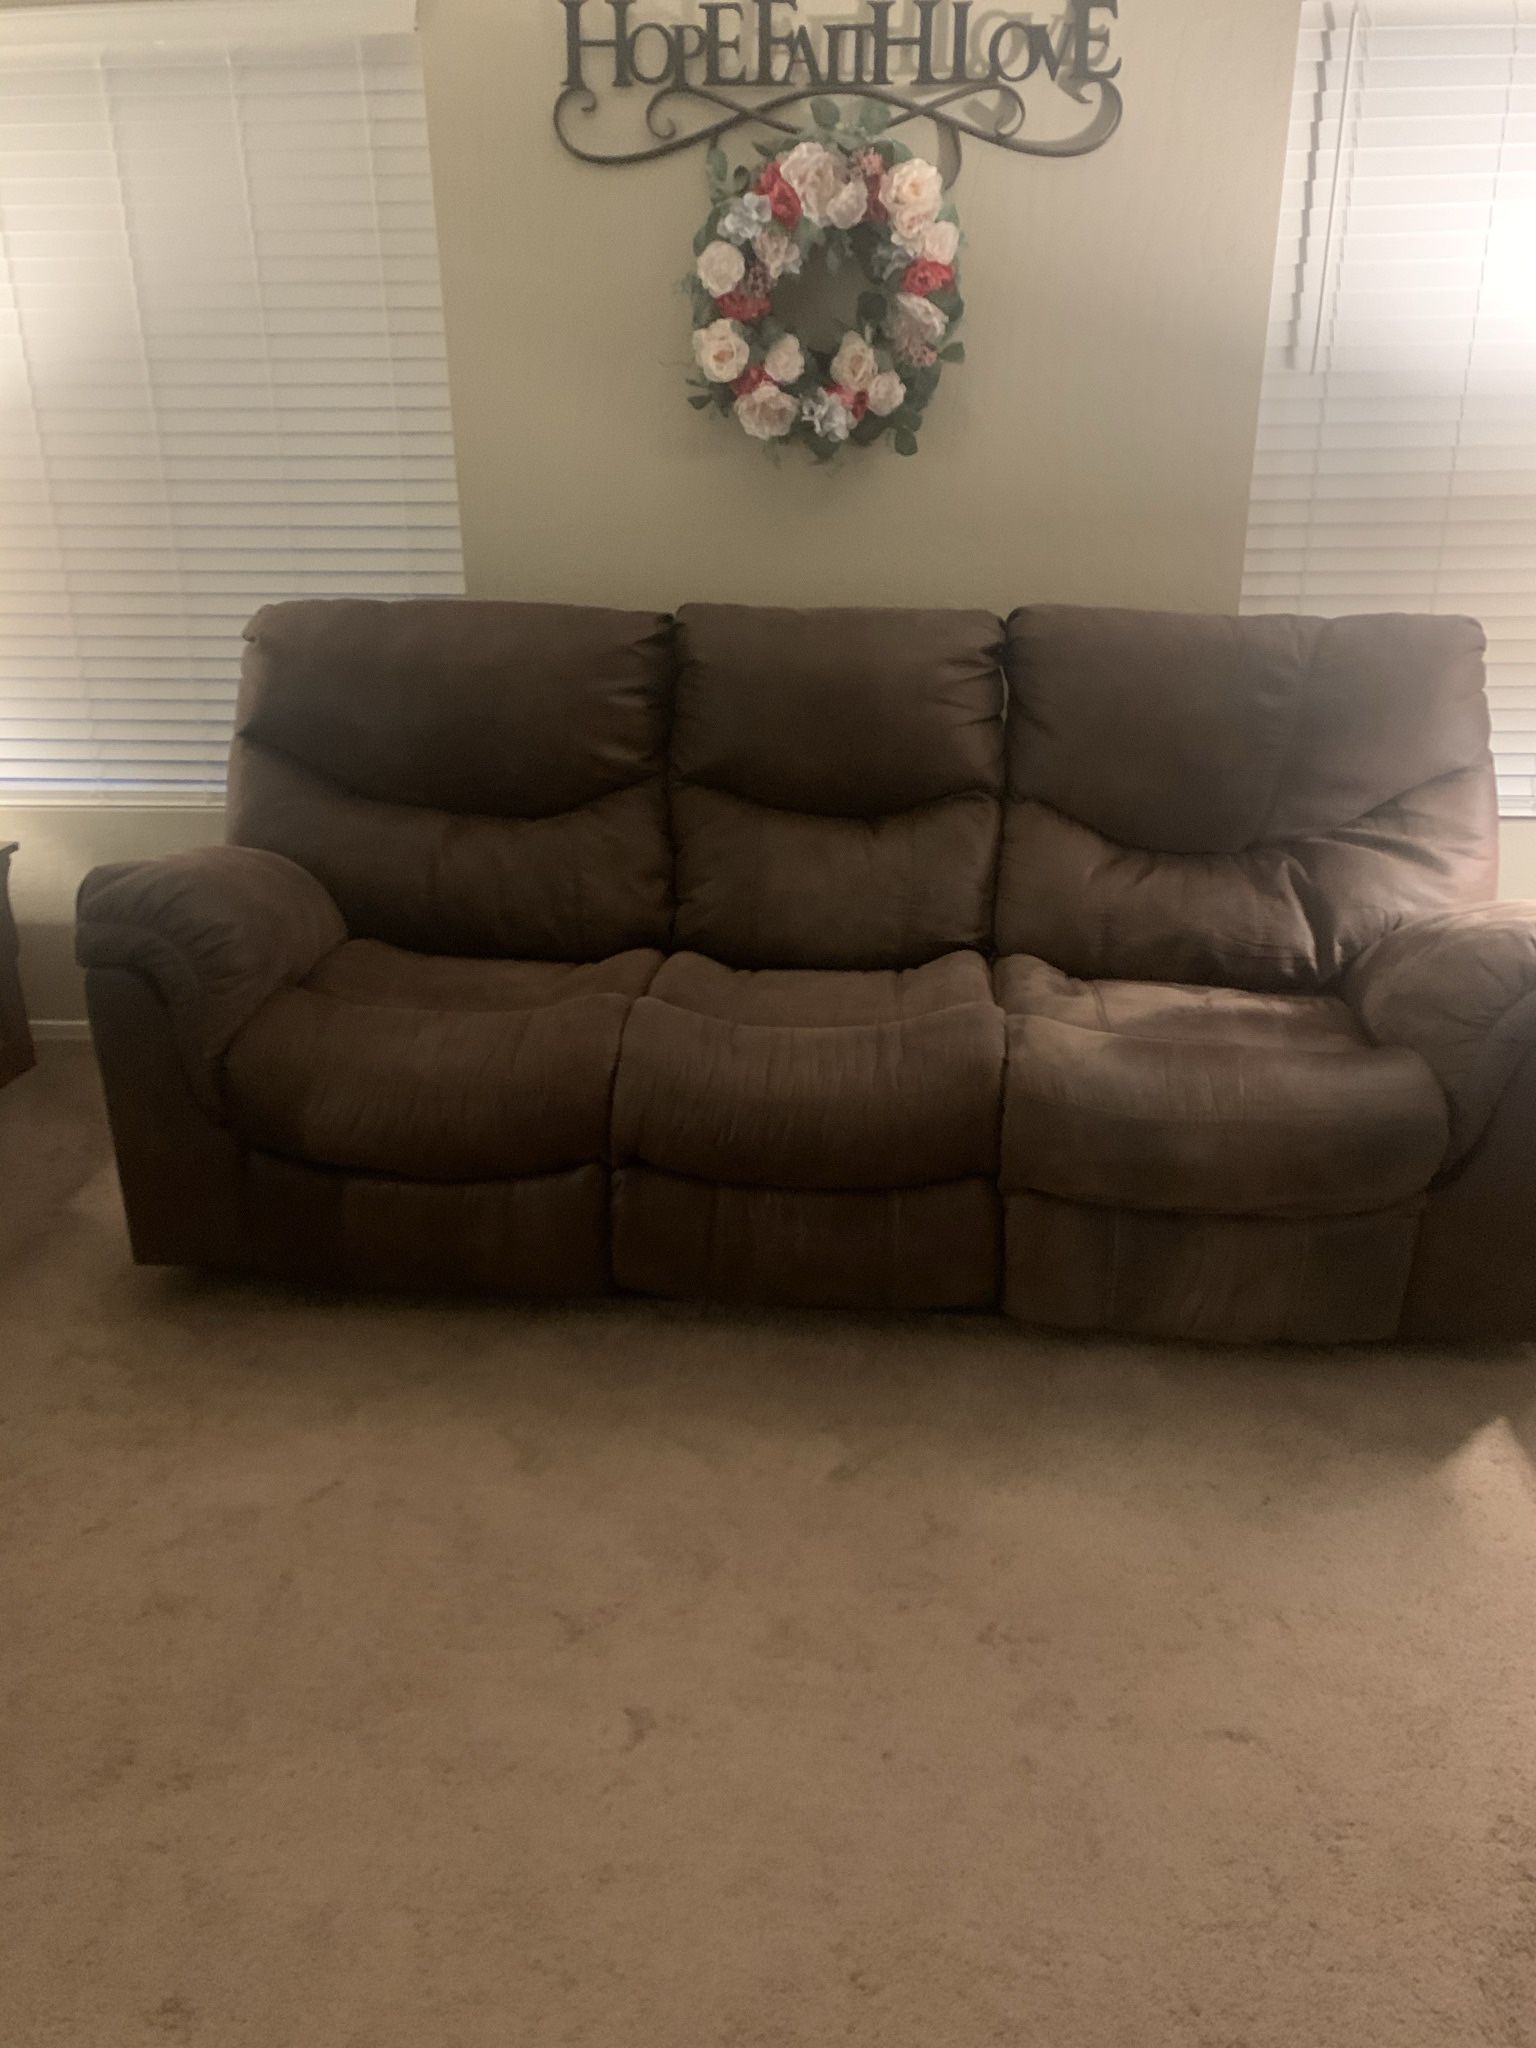 Recliner Couch & Loveseat selling both in good condition.